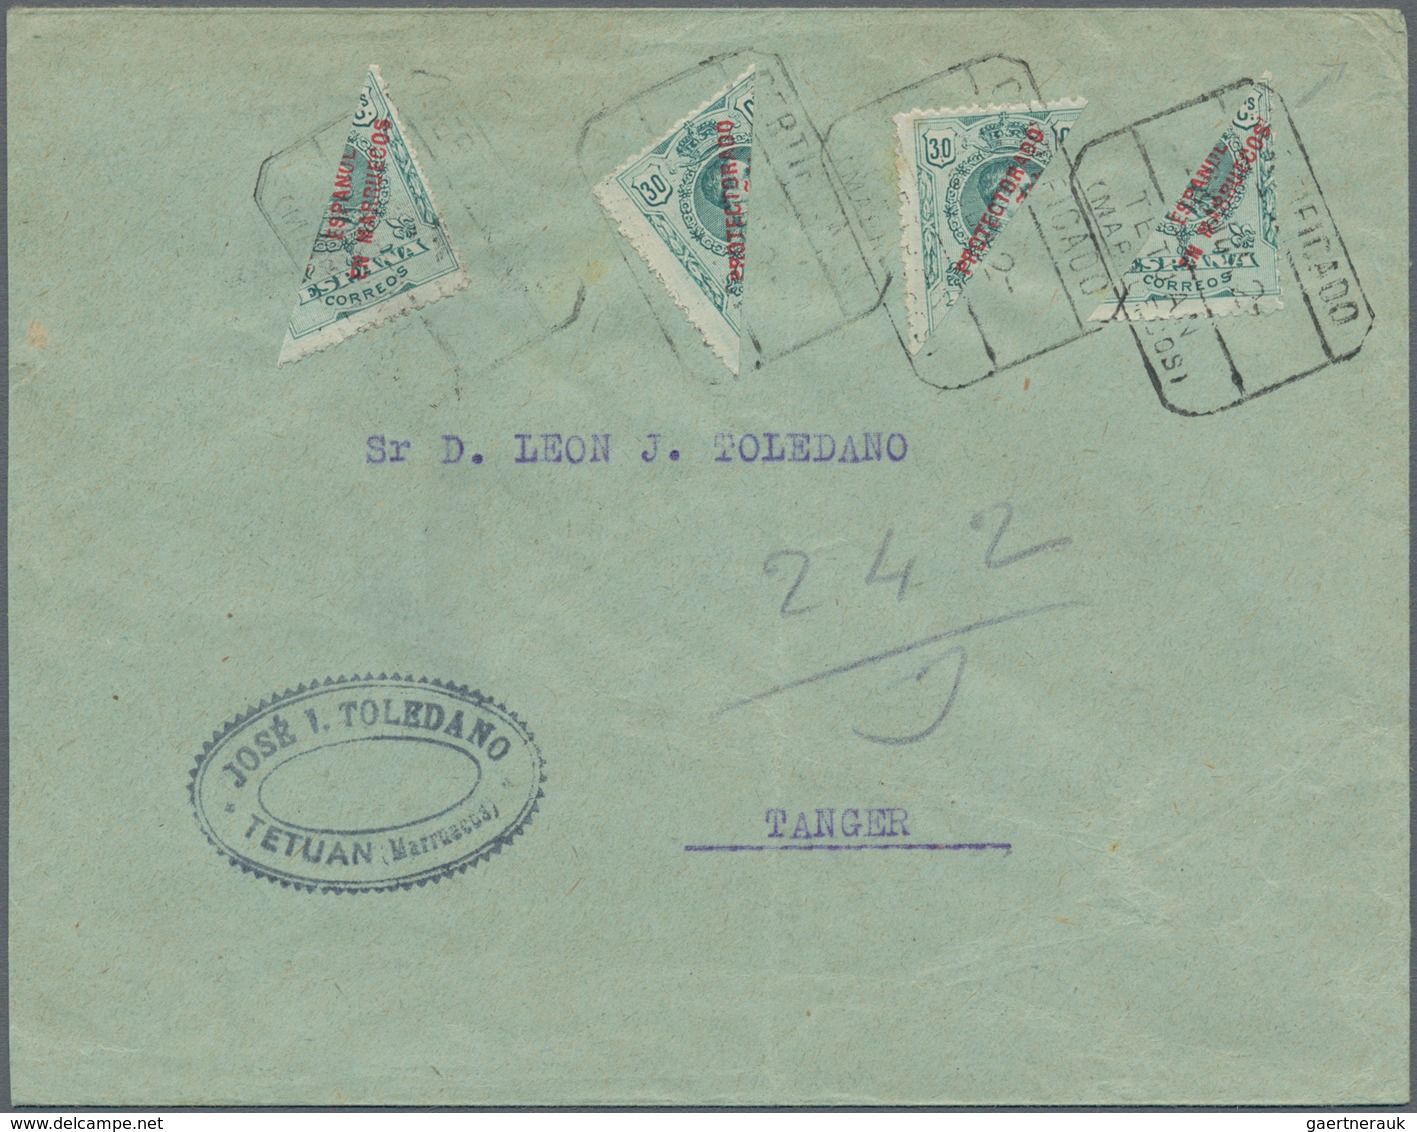 Spanisch-Marokko: 1920, 6 Envelopes Cancelled TETUAN, All Franked With Bisected Stamps Addressed To - Spanish Morocco